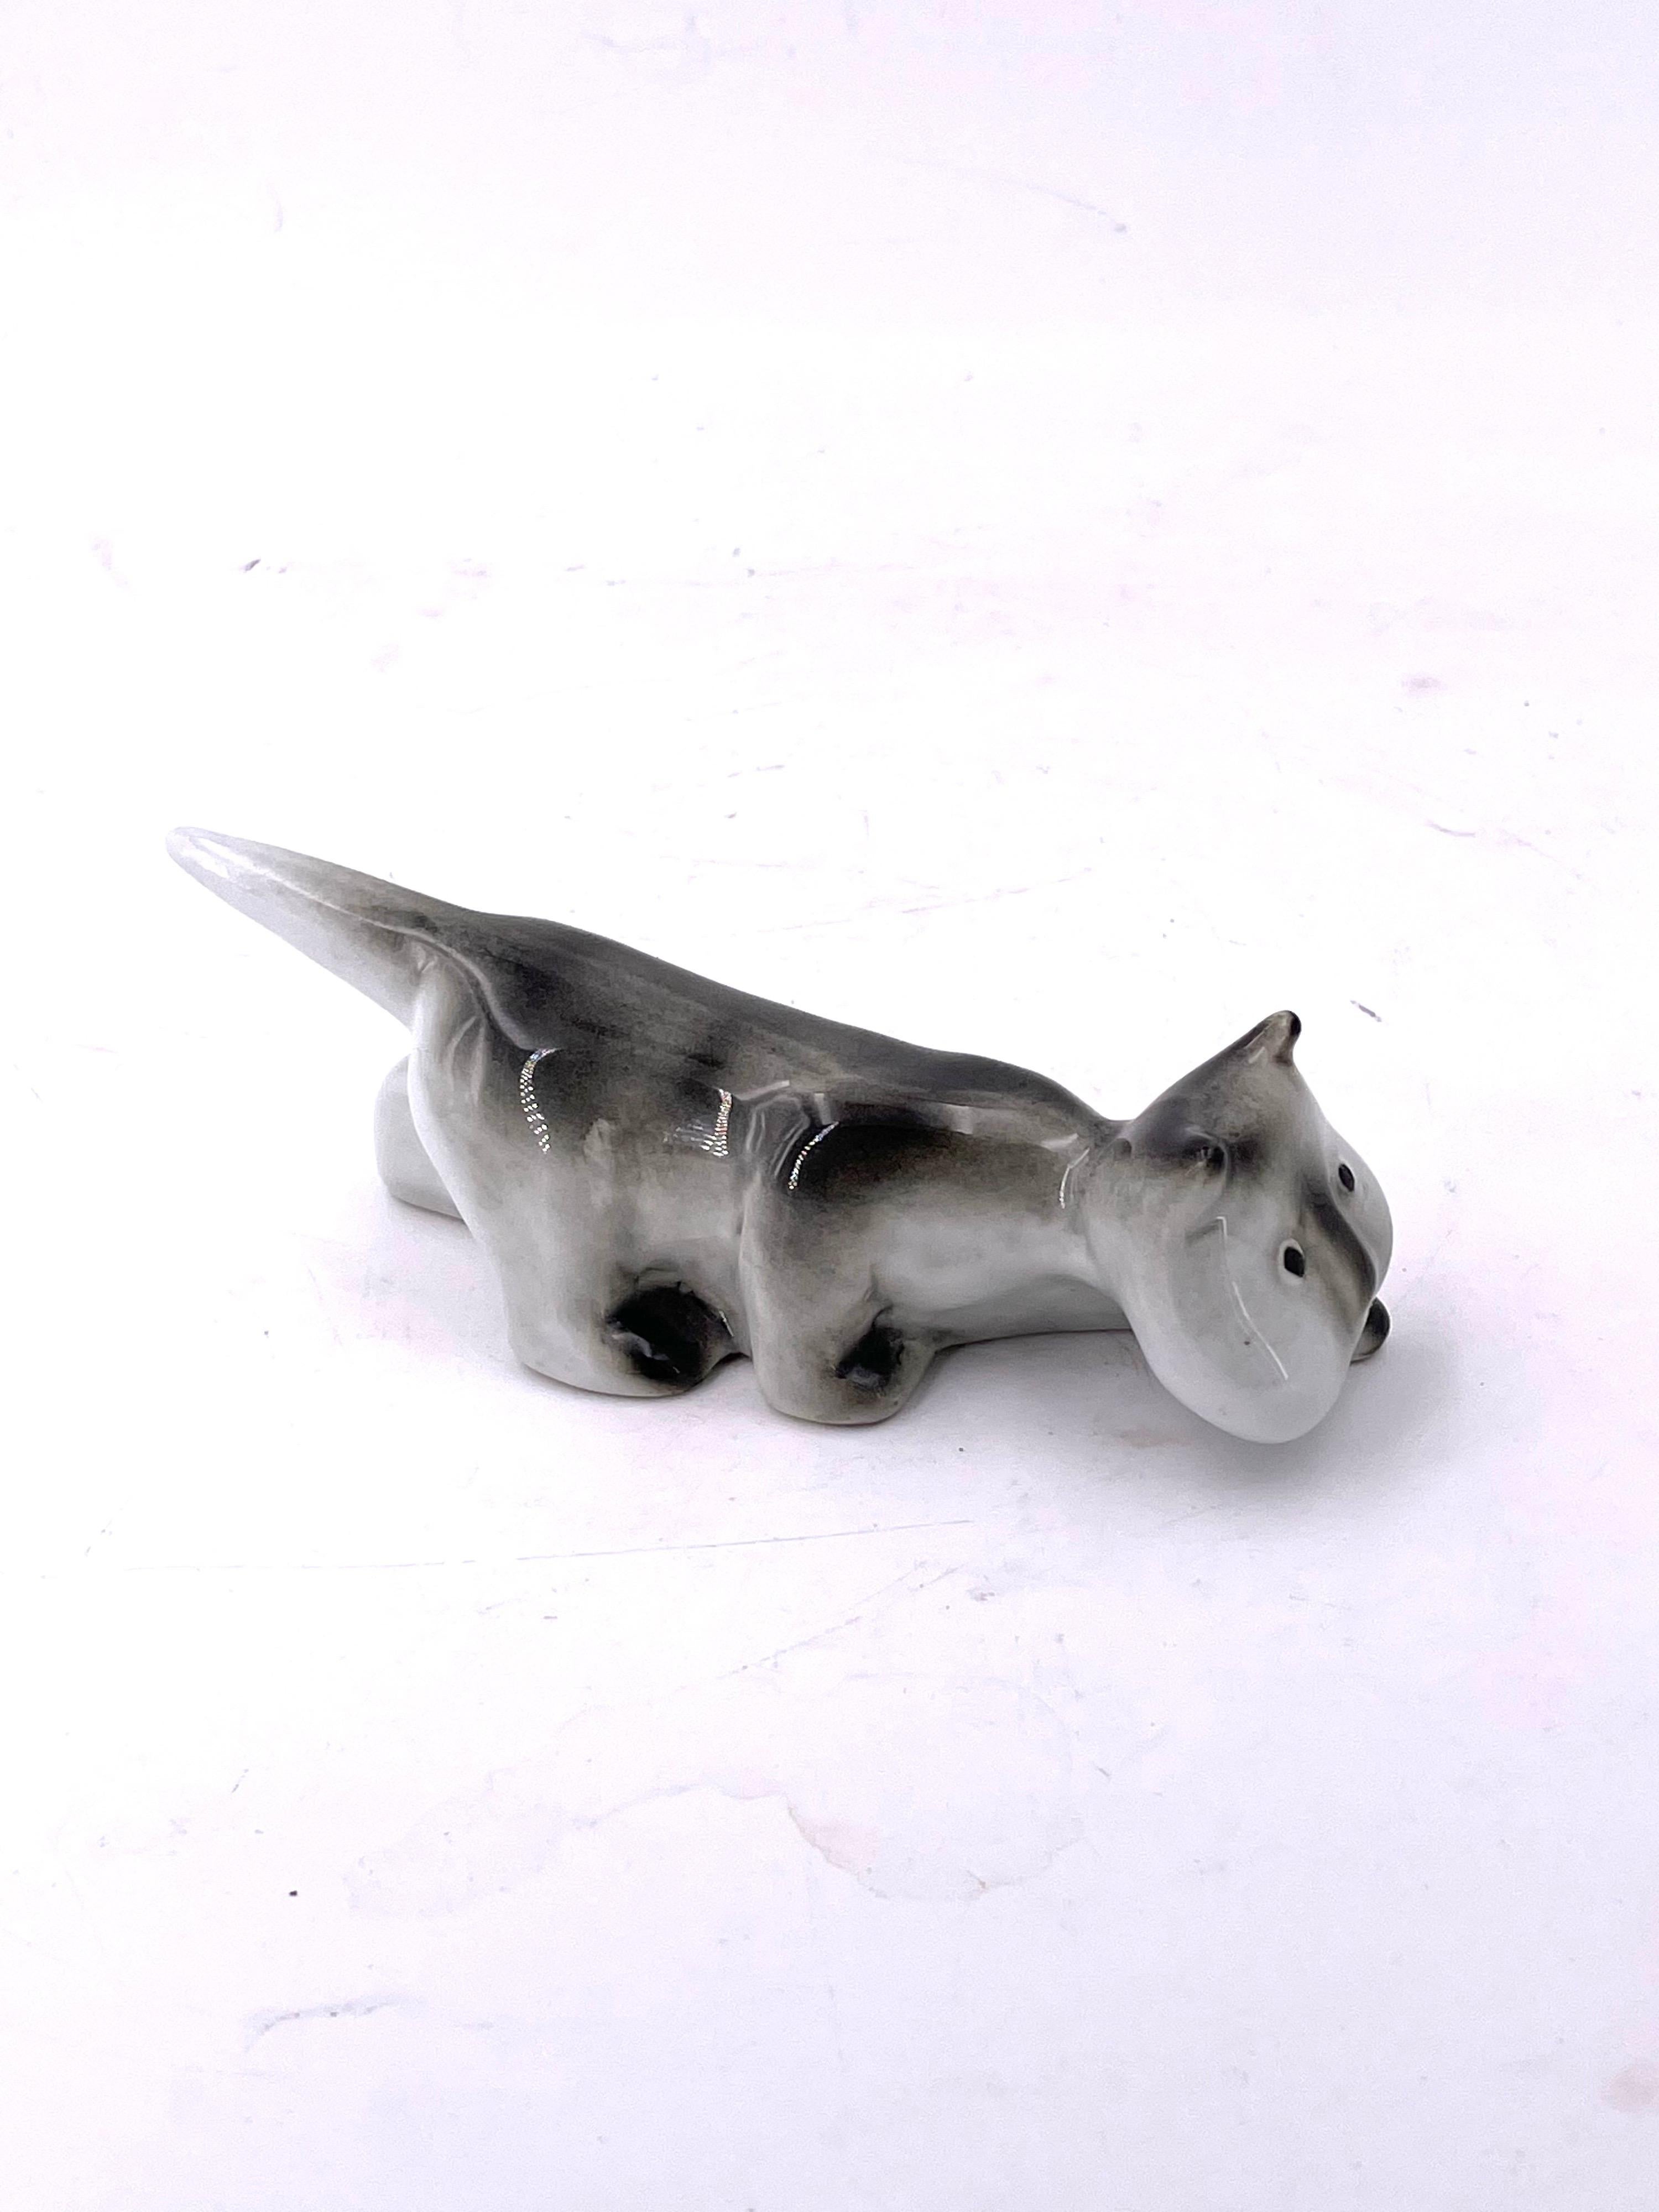 Beautiful ceramic cat in porcelain finish by Arabia of Finland circa 1950s, great condition.